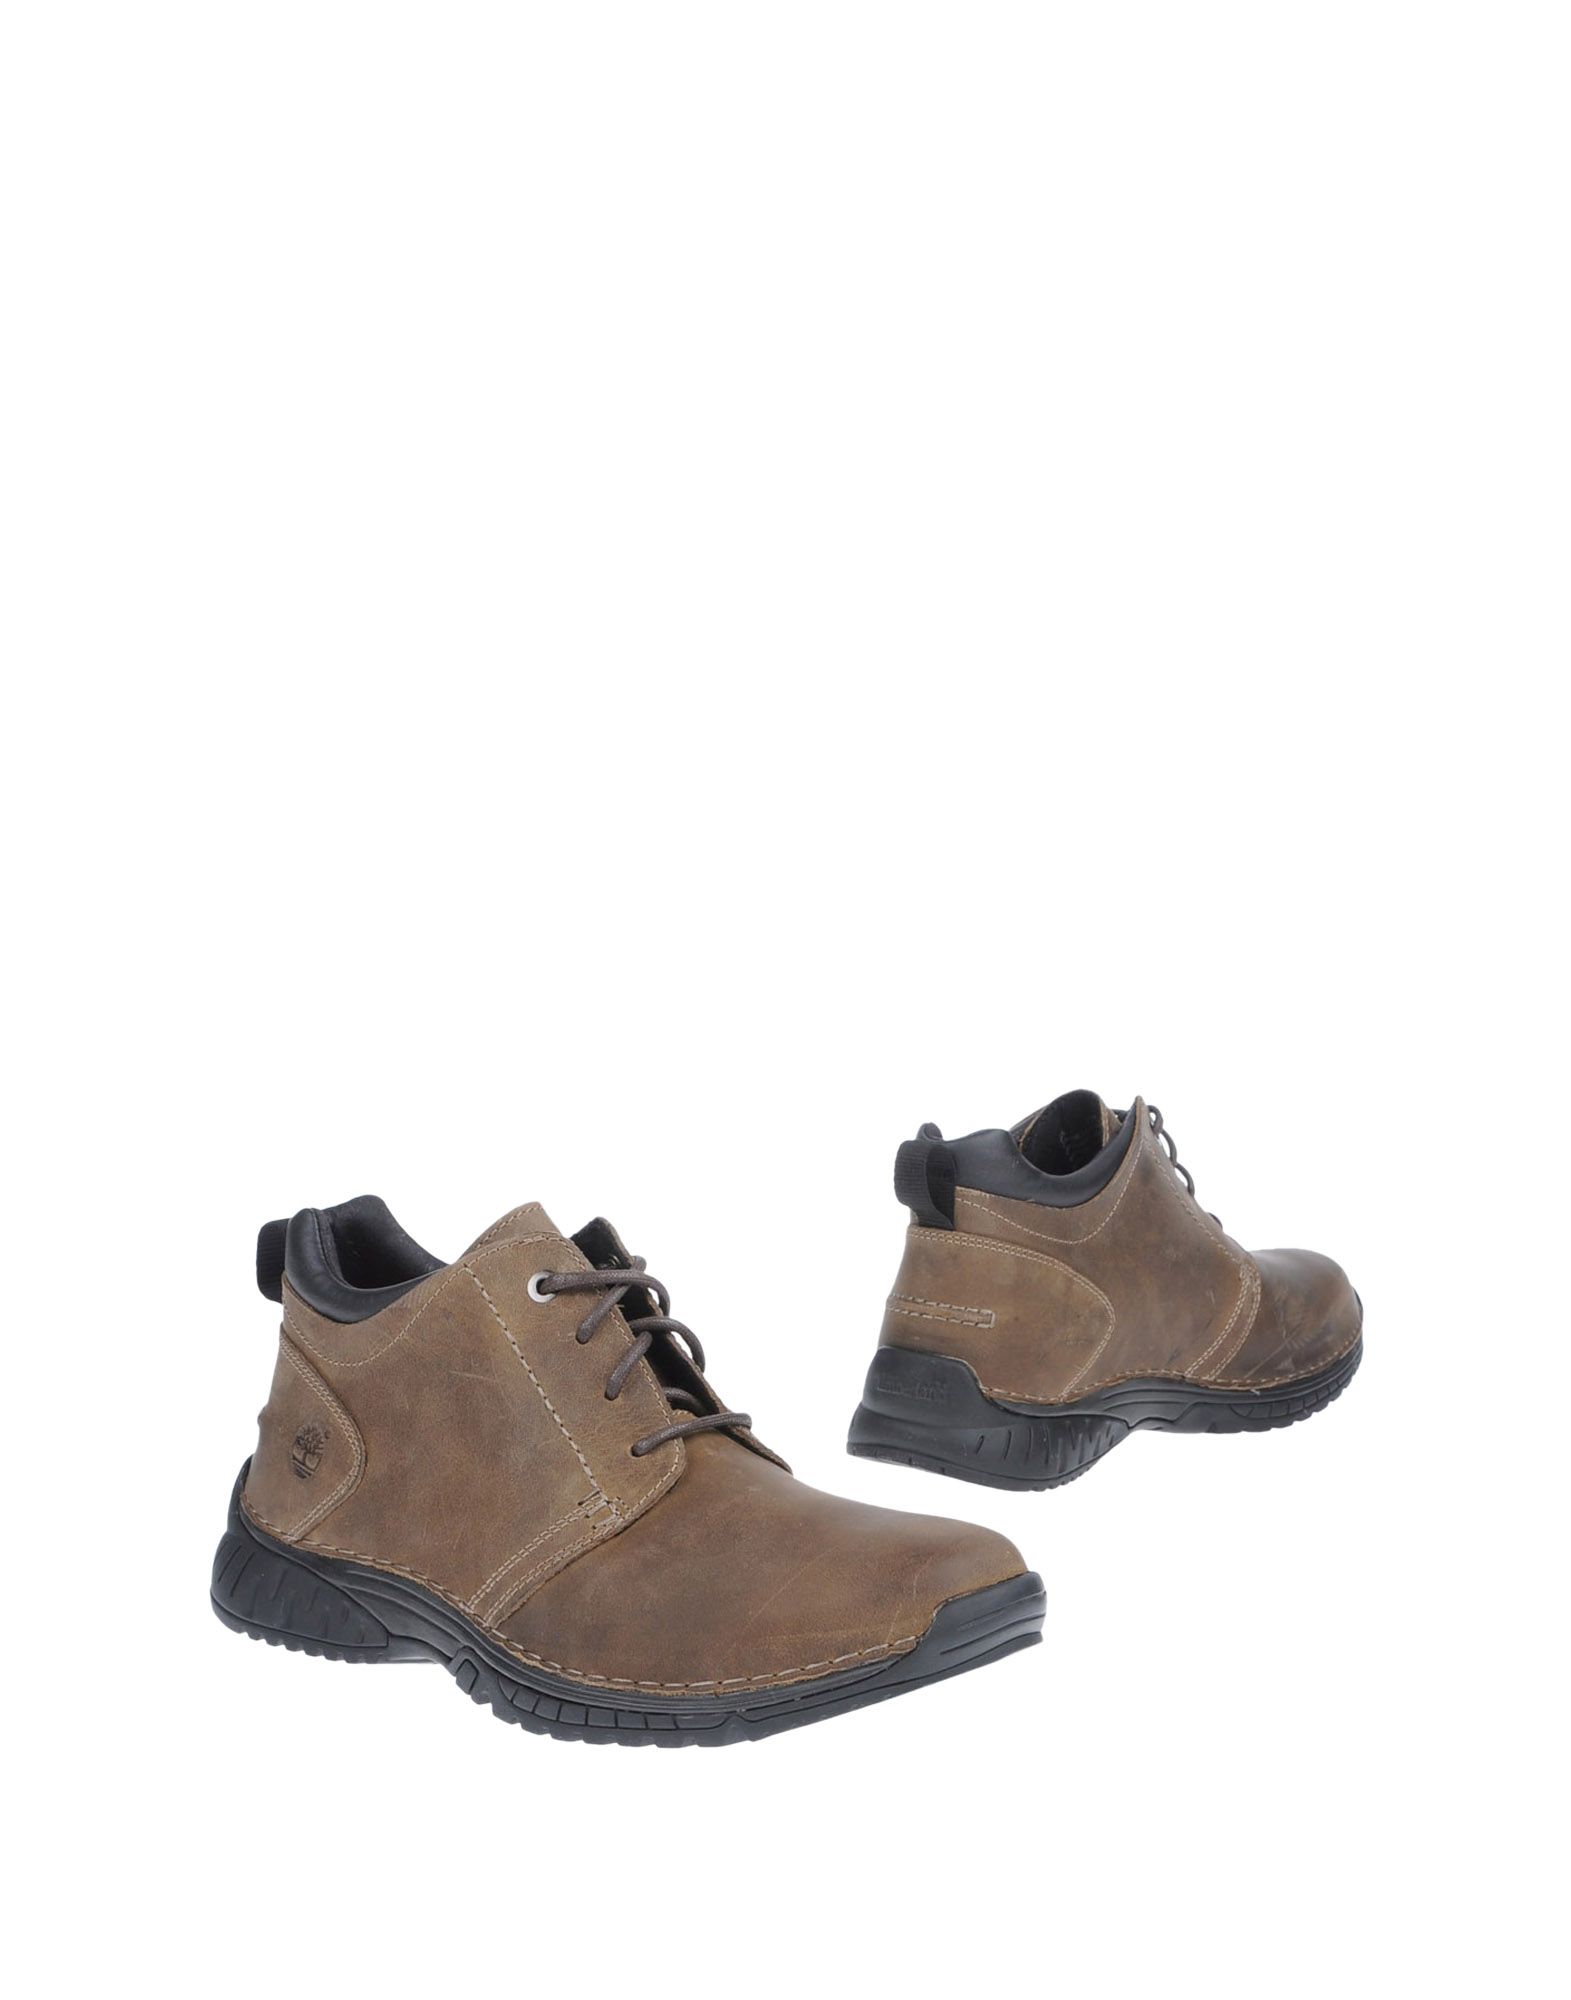 Foto Earthkeepers By Timberland Botines Cordones Hombre Caqui